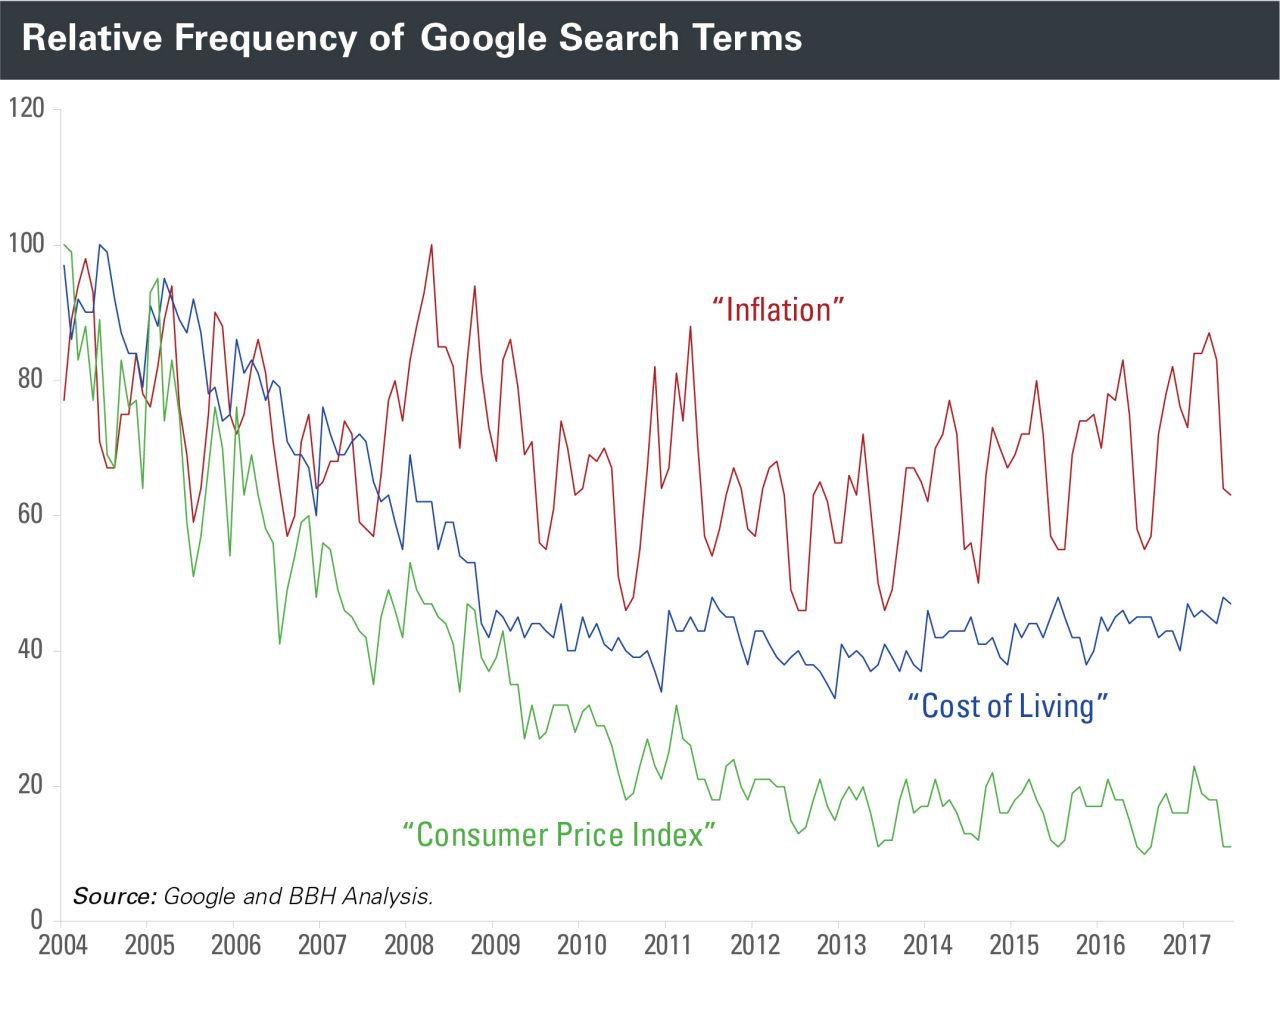 The frequency of inflation, cost of living, and consumer price index in Google's search engine from 2004 to 2017